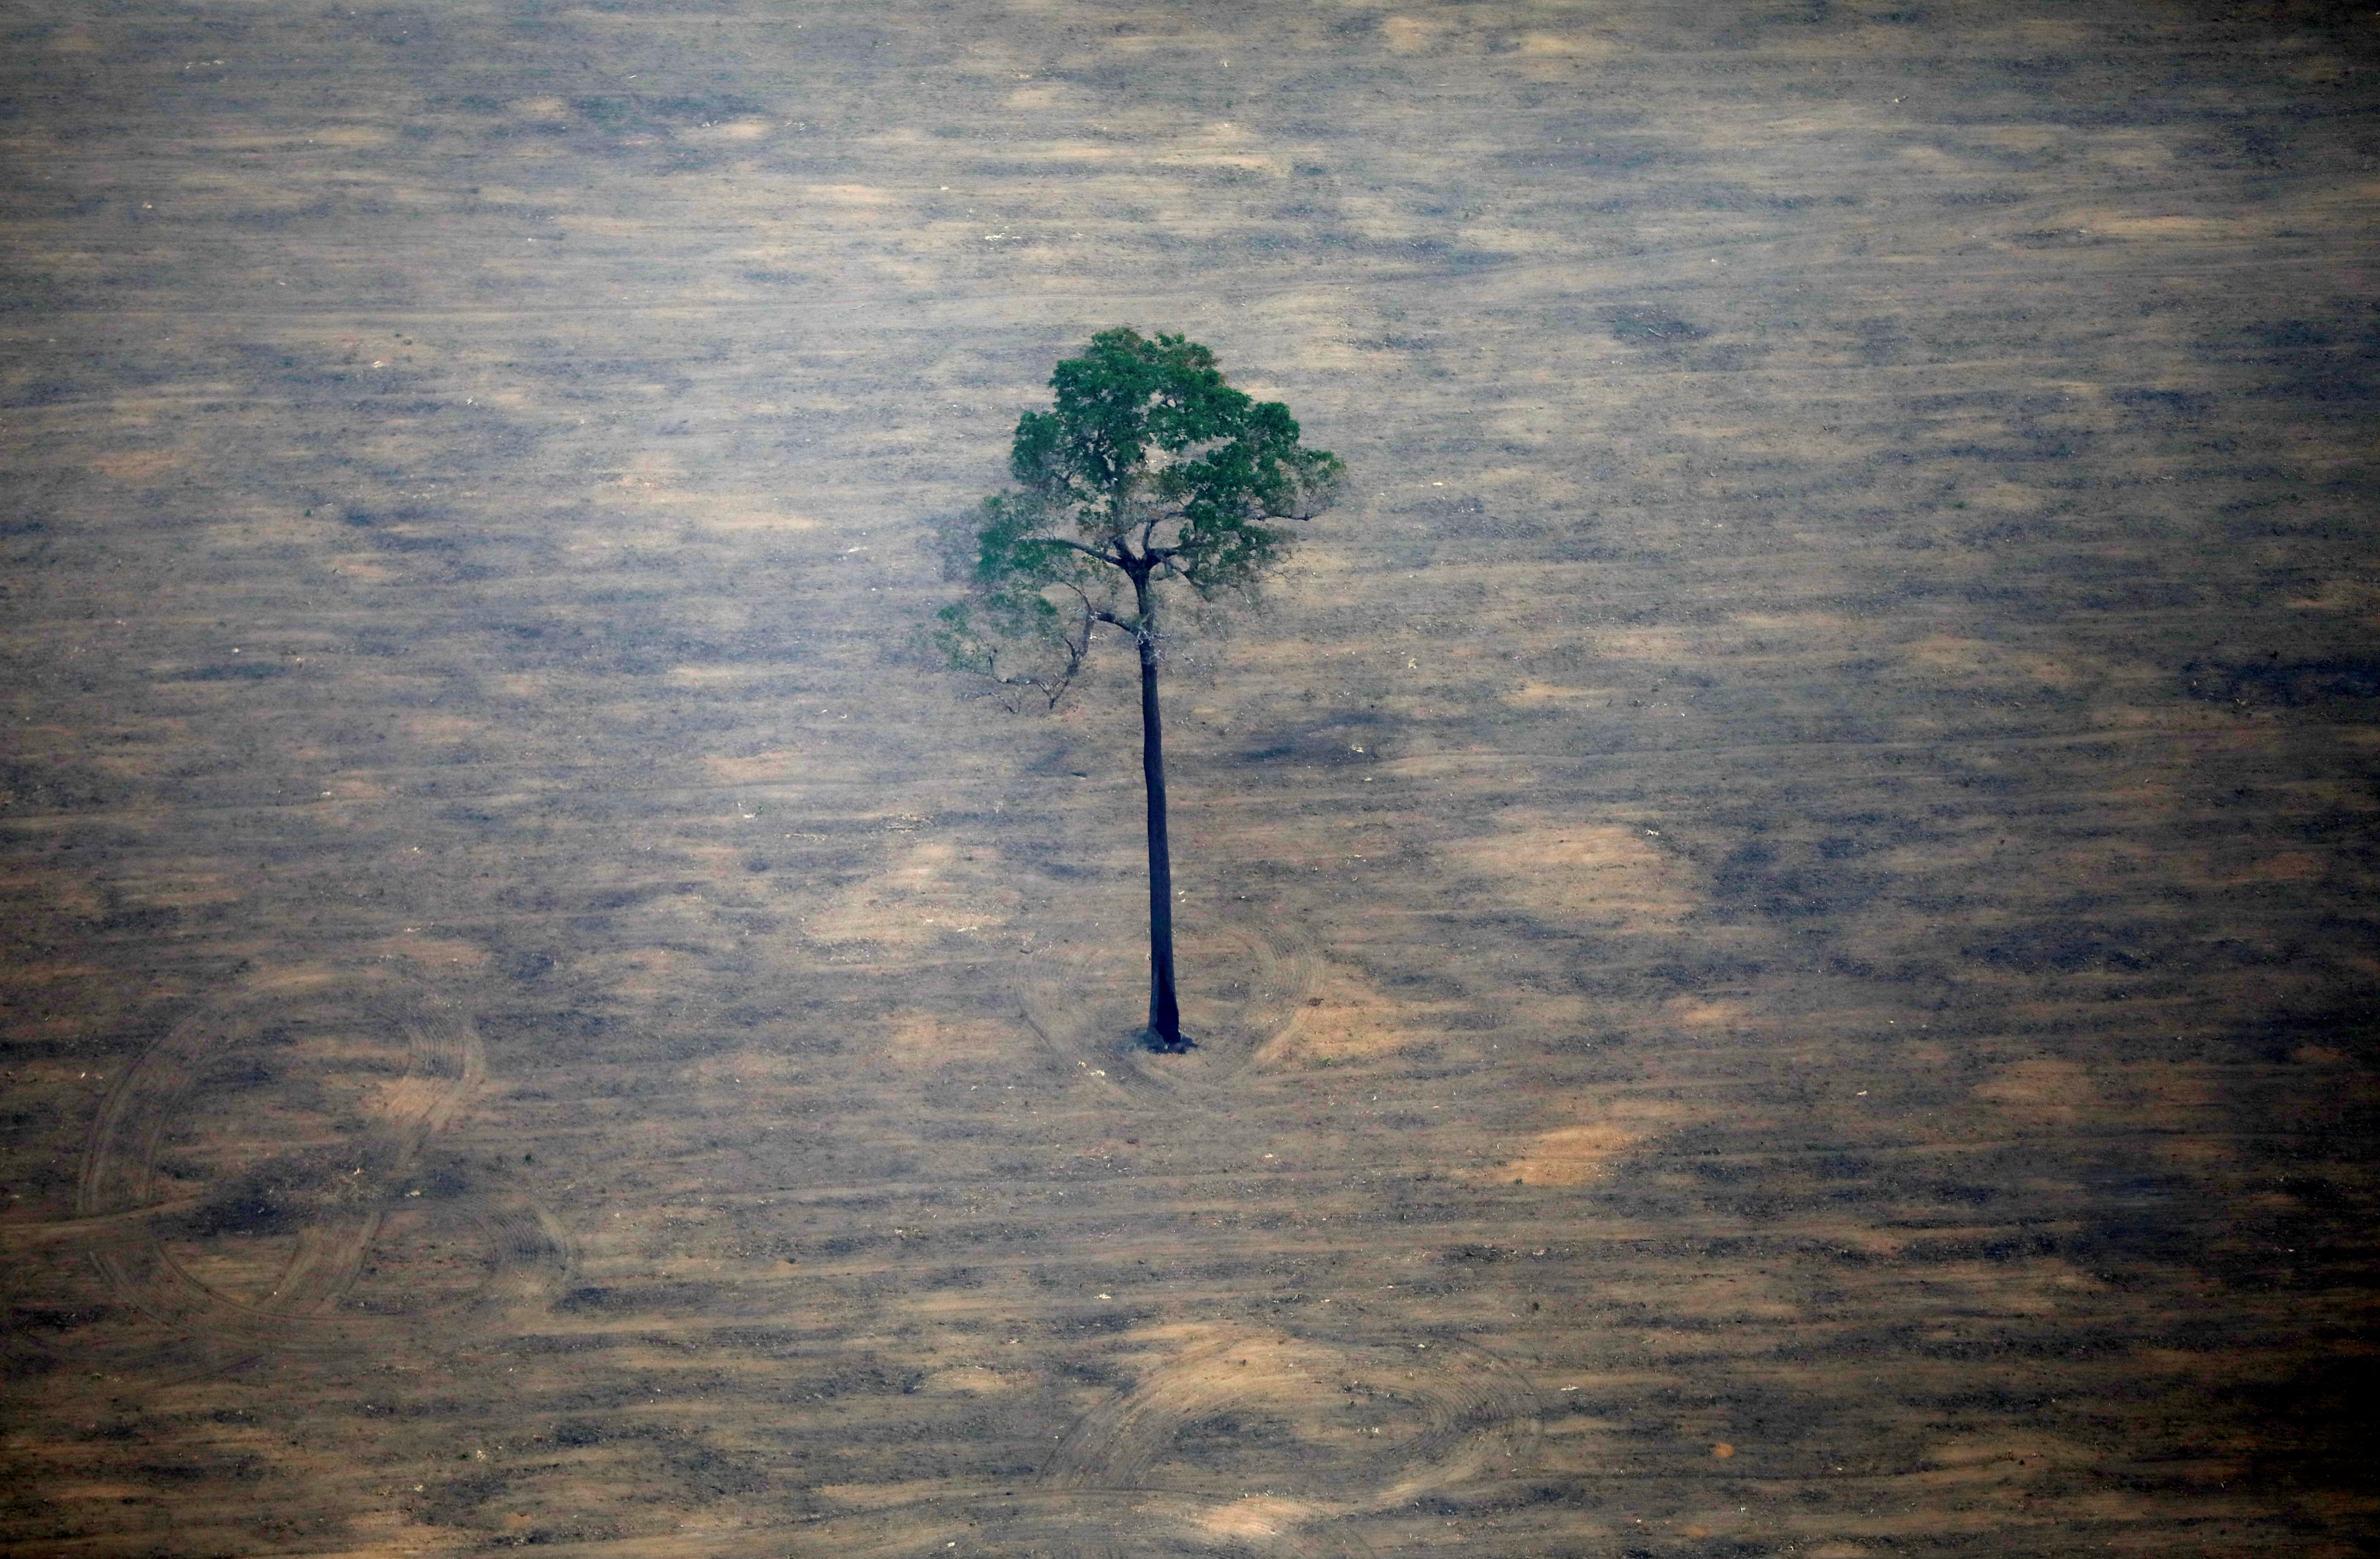 An aerial view shows a deforested plot of the Amazon near Porto Velho, Rondonia State, Brazil, September 17, 2019. REUTERS/Bruno Kelly